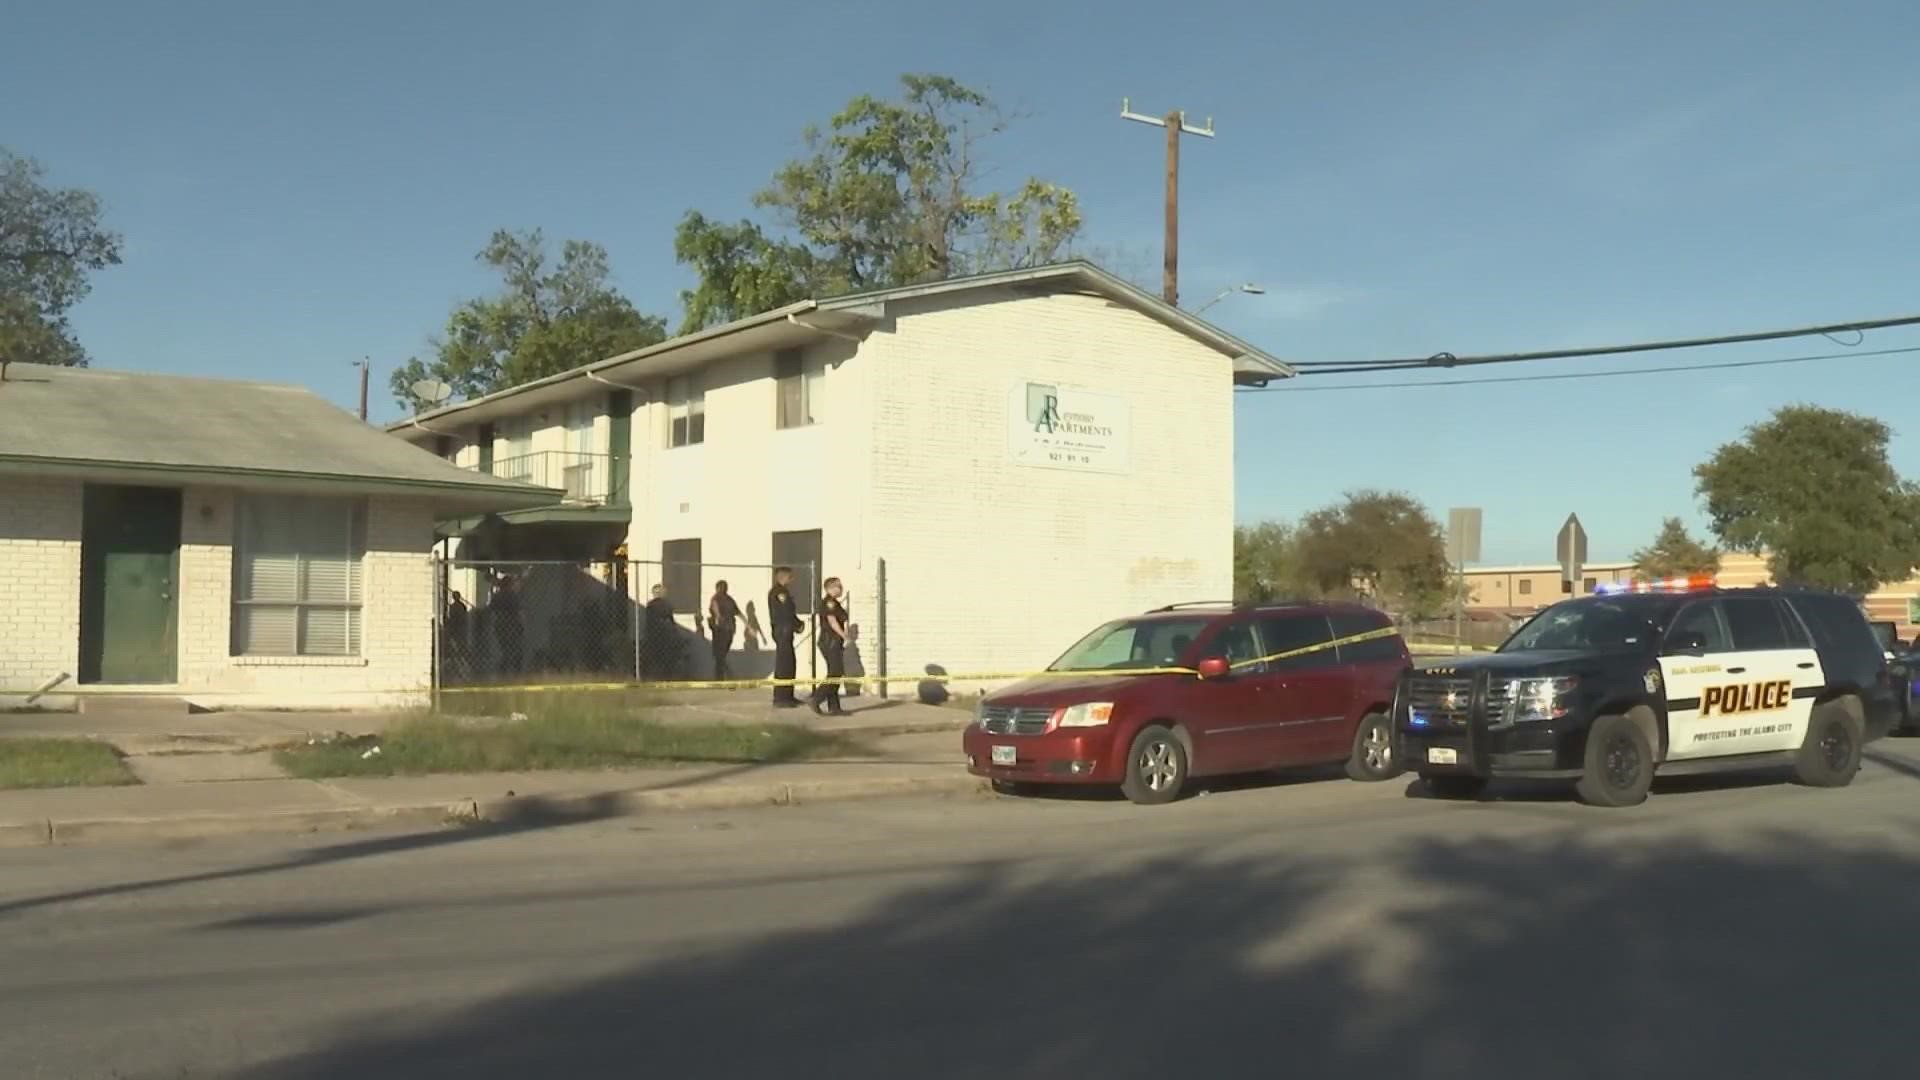 SAPD said they're looking for a suspect after the second shooting near a south-side apartment complex today.